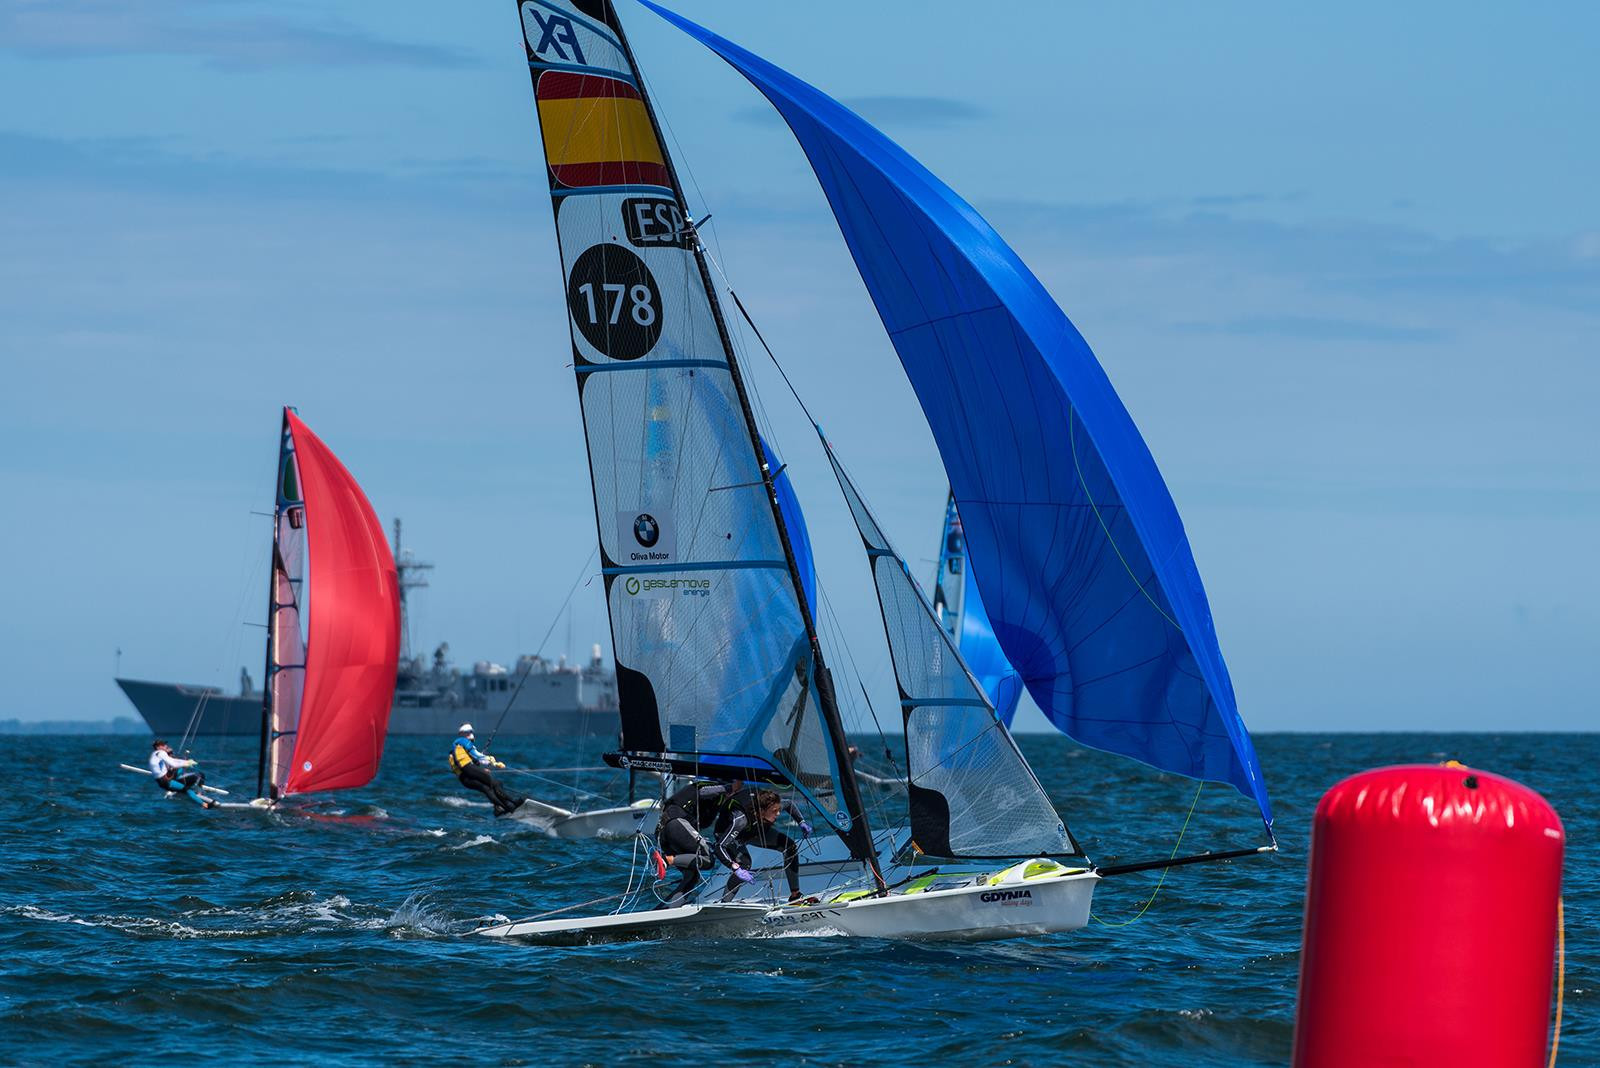 Spanish sisters rise into lead at 49erFX European Championships